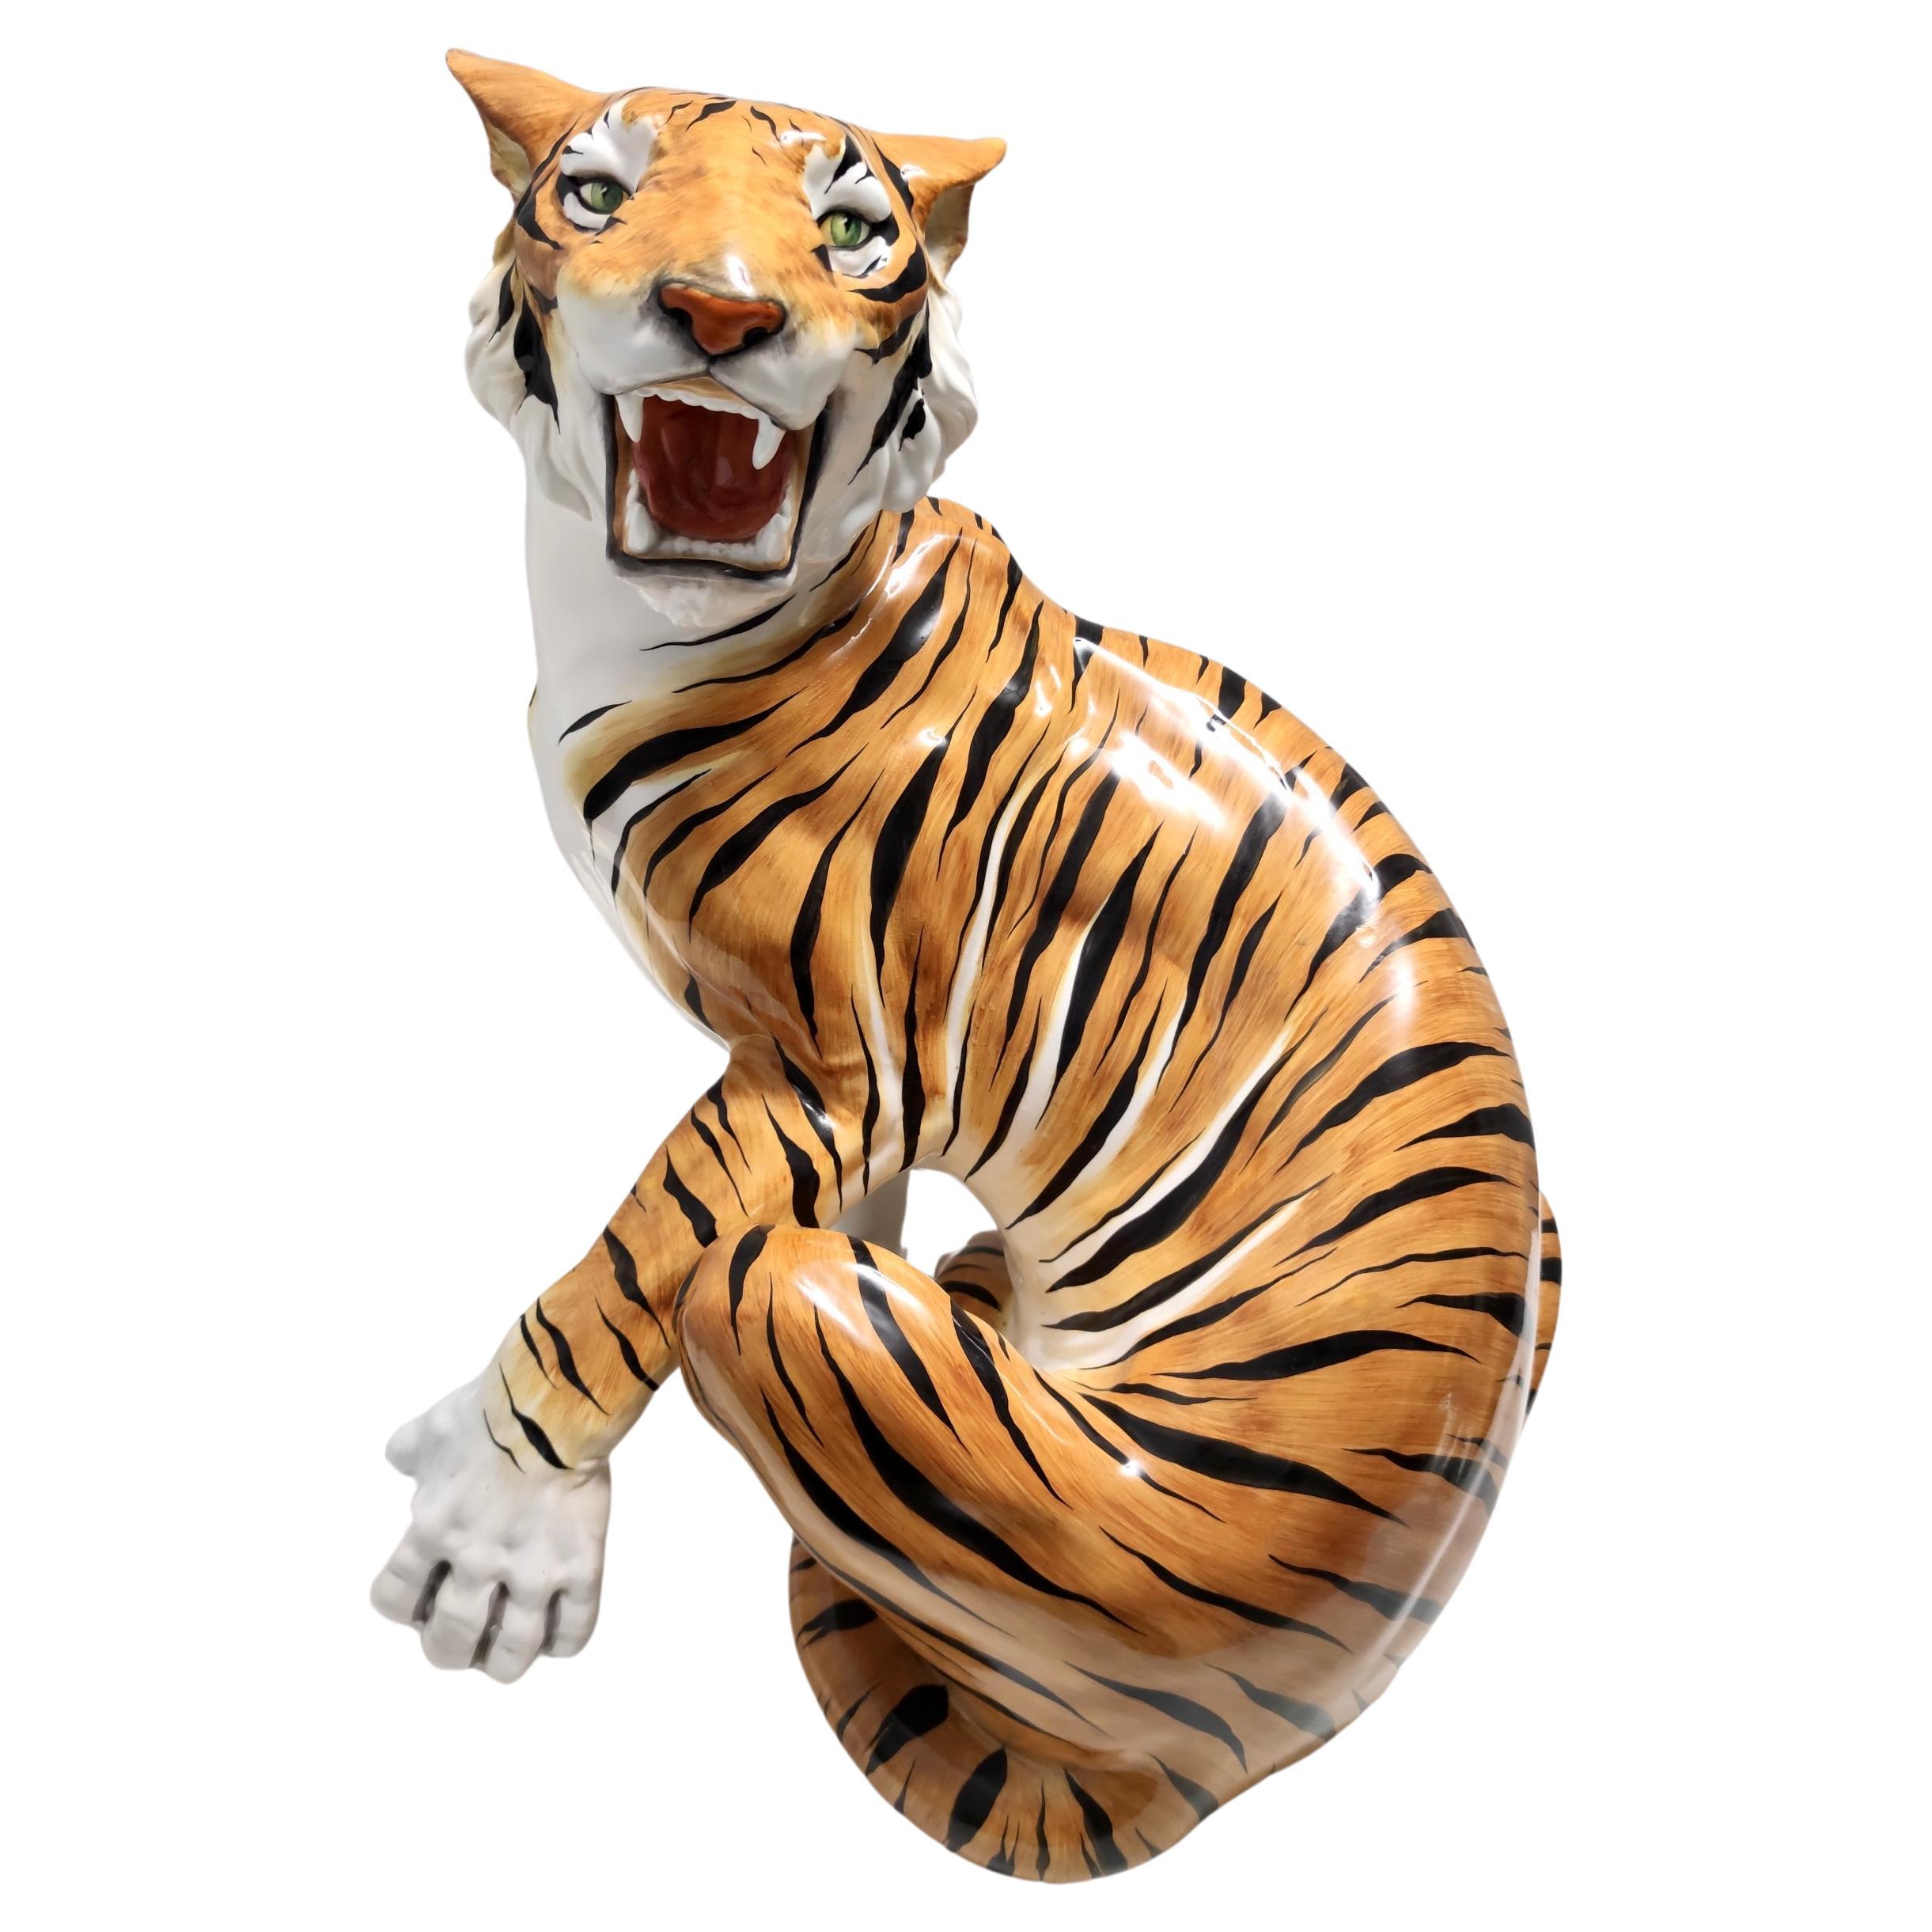 Large Vintage Hand Painted Ceramic Roaring Tiger, Italy